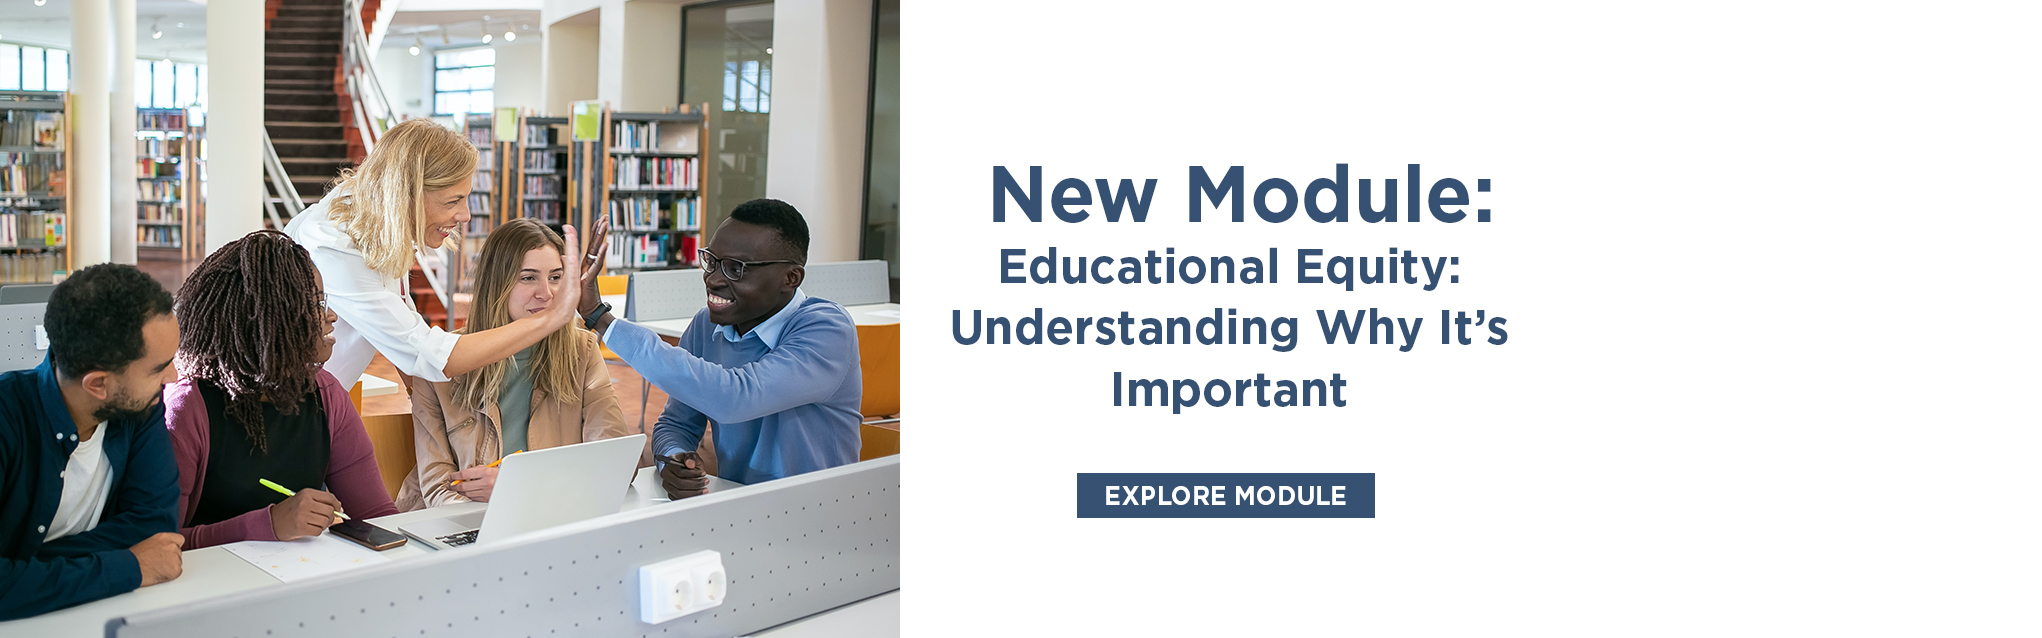 New Module: Educational Equity: Understanding Why It's Important